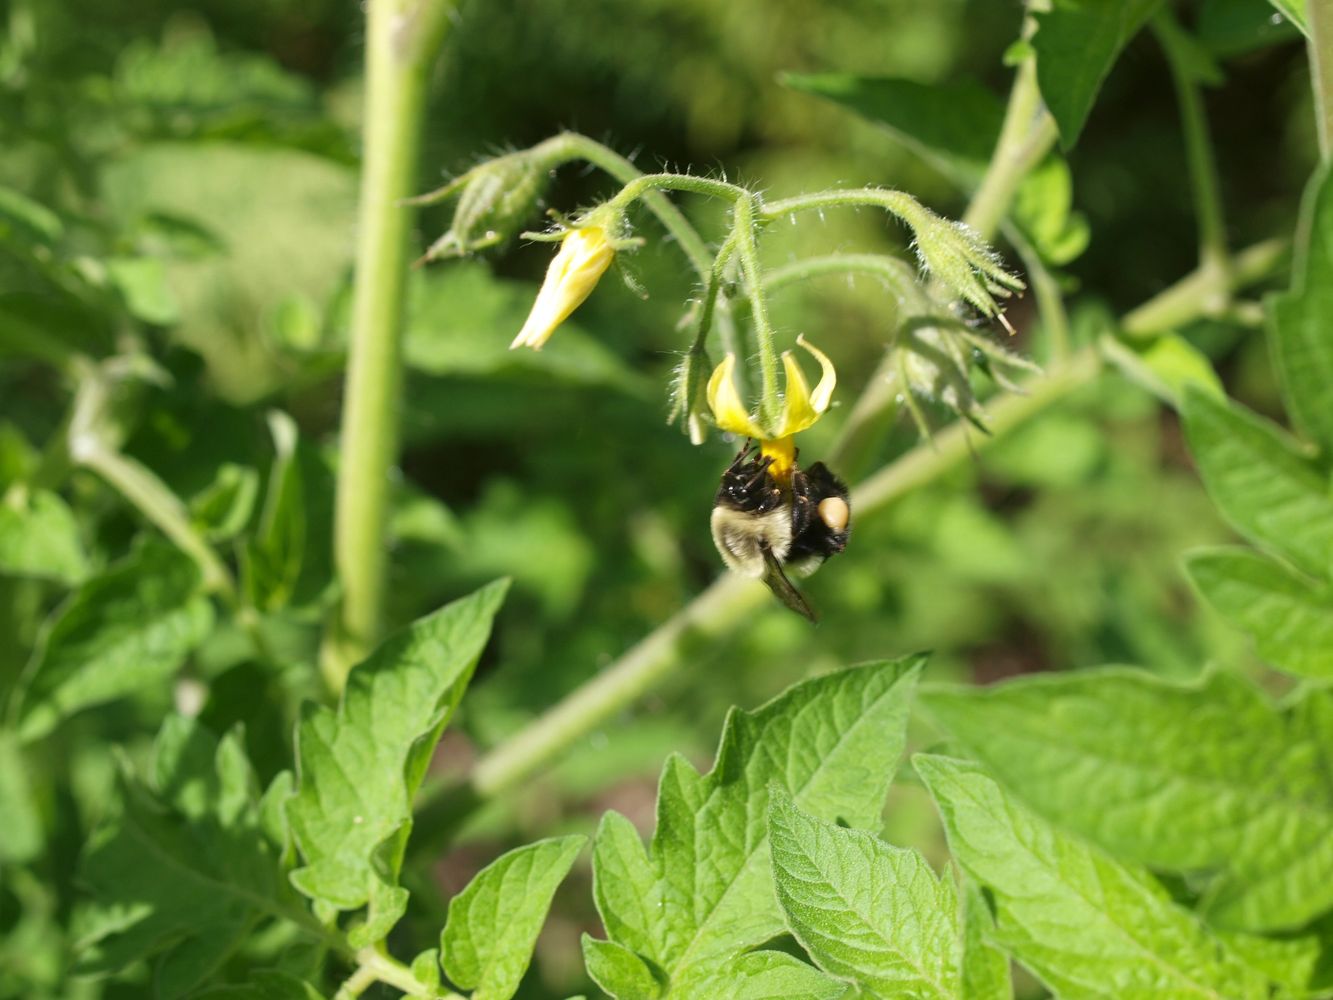 Bumble bee pollinating tomato flower